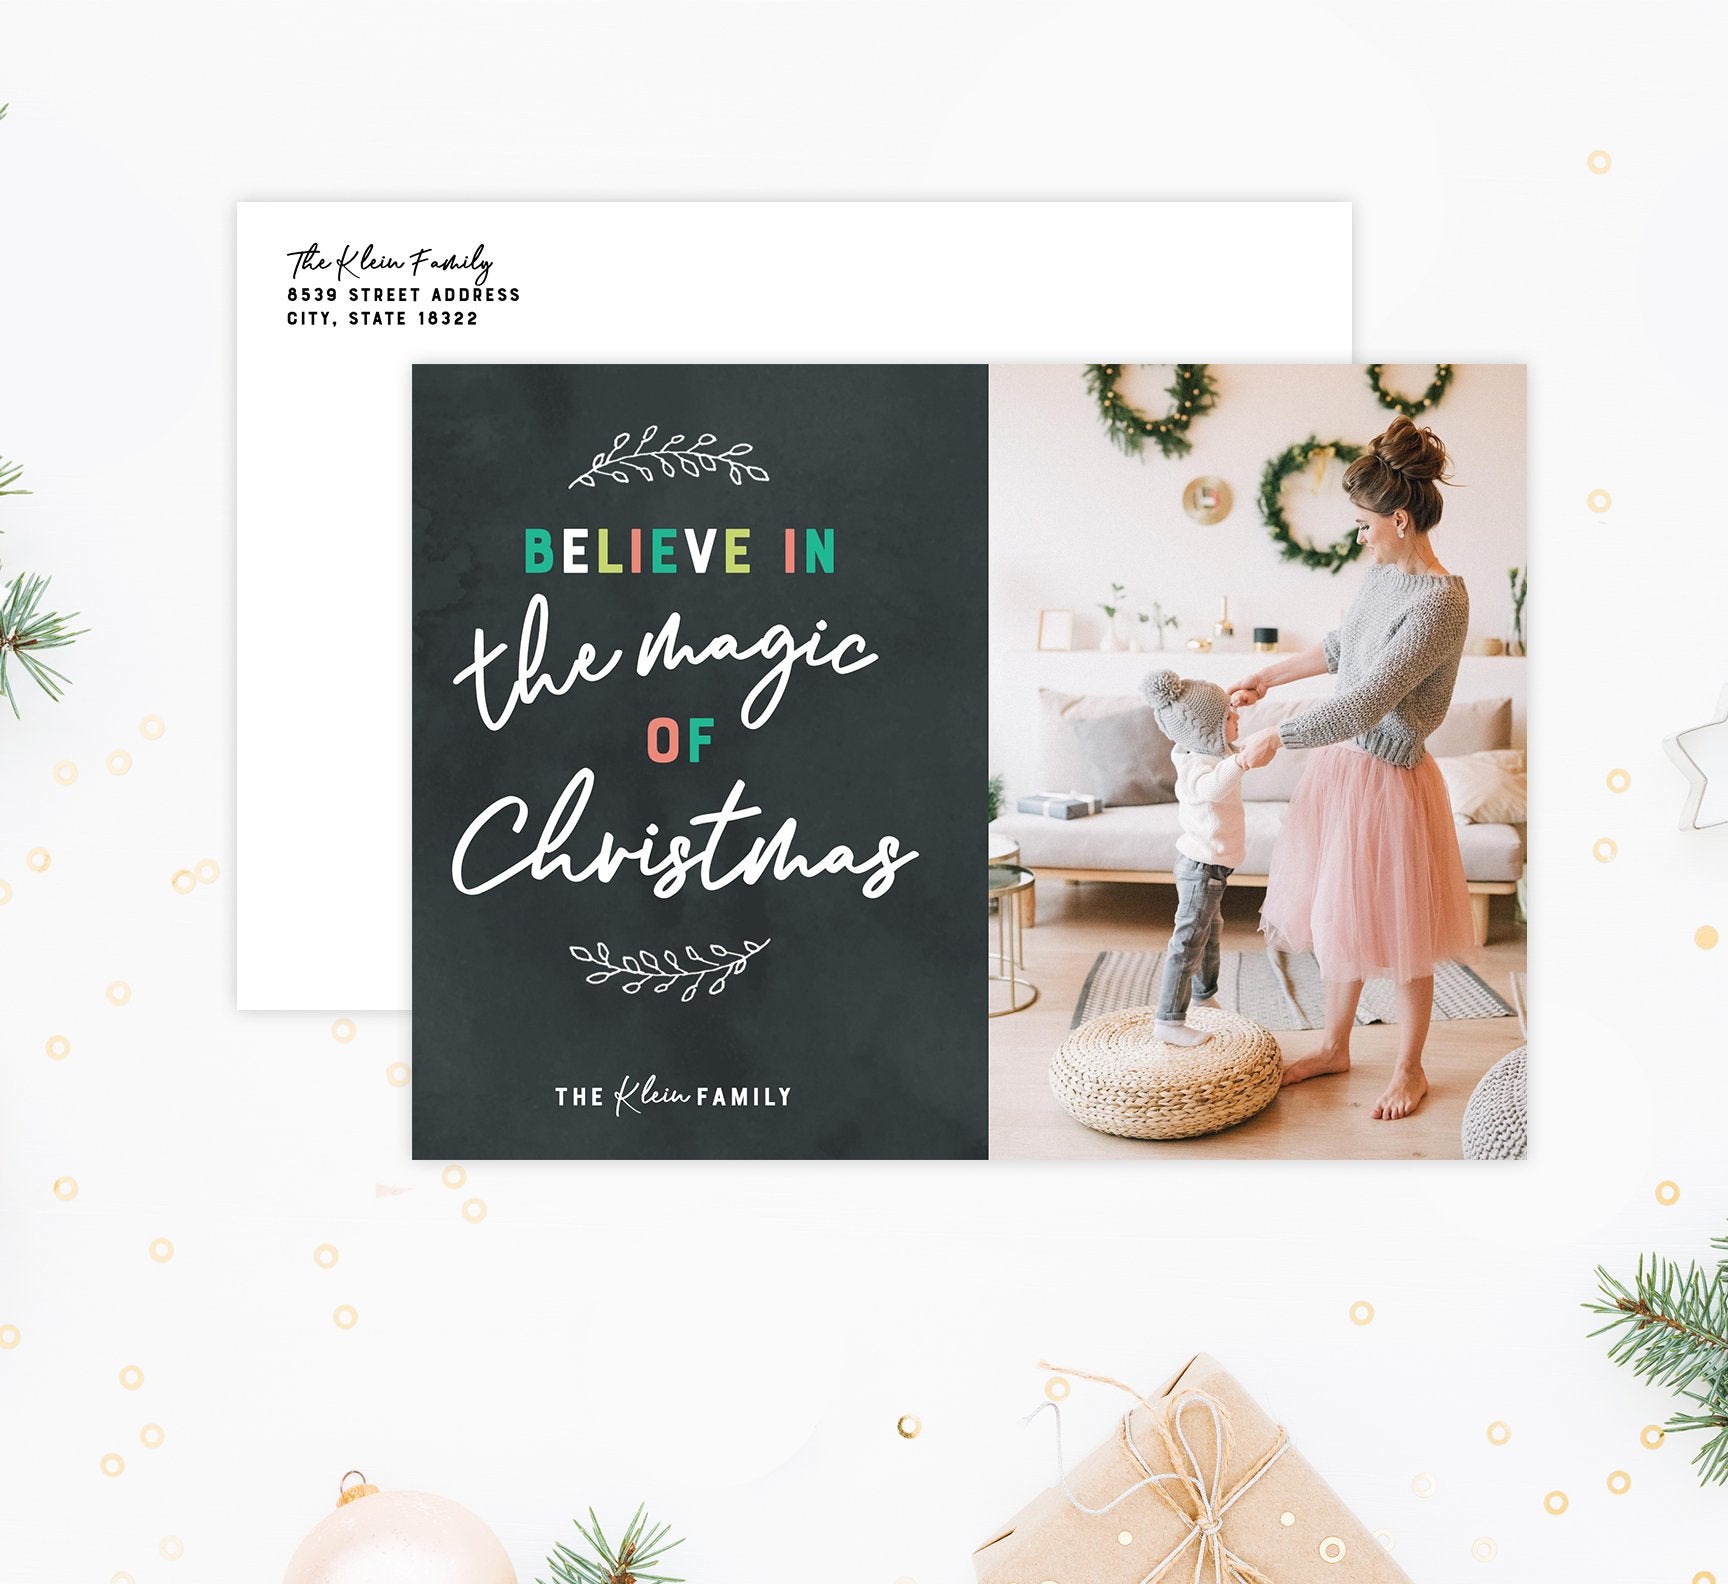 Christmas Magic Holiday Card Mockup; Holiday card with envelope and return address printed on it. 